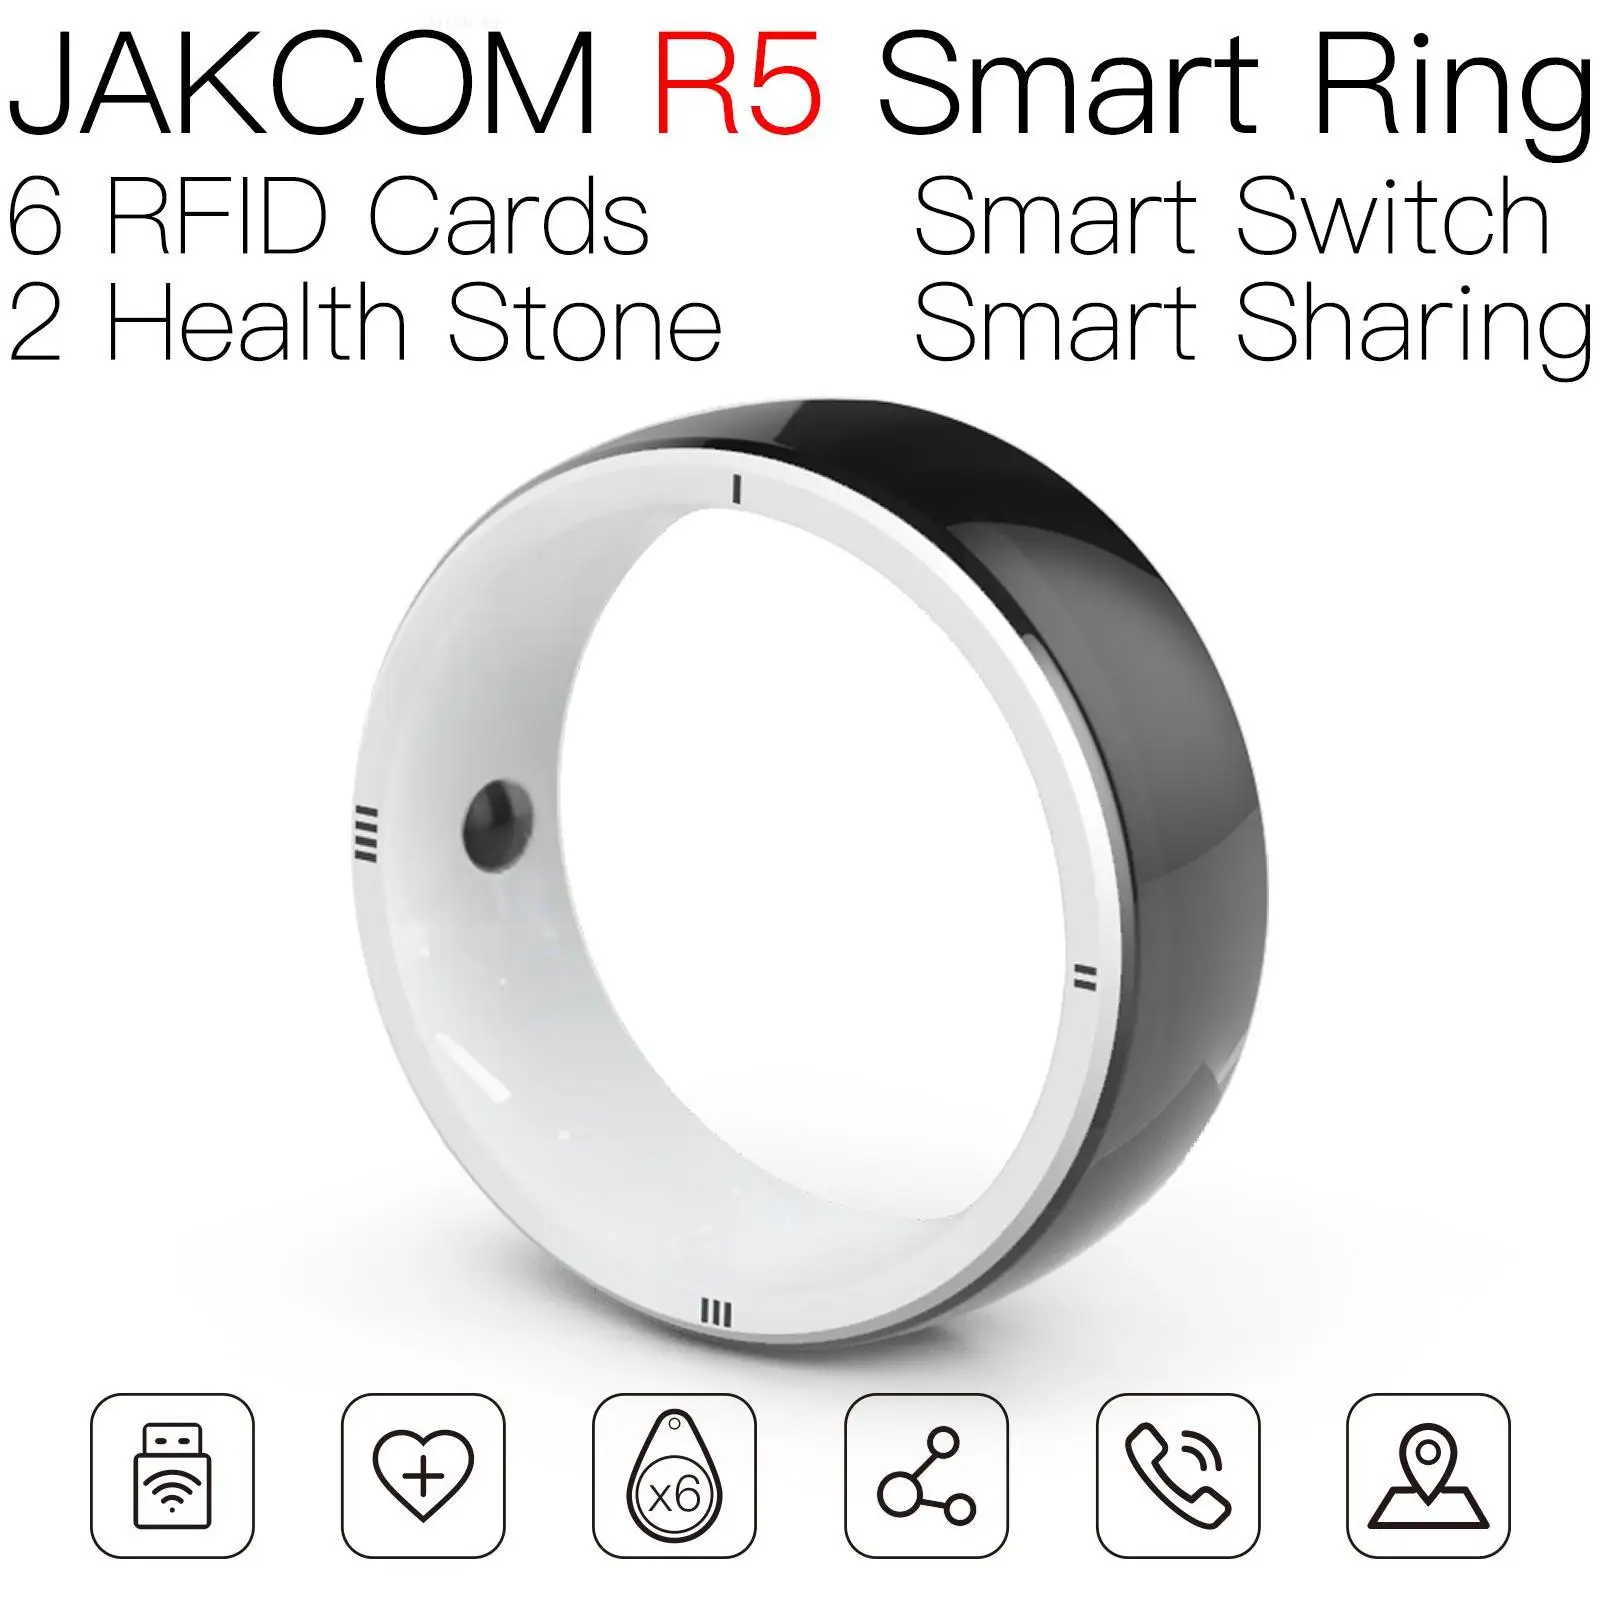 

JAKCOM R5 Smart Ring Super value as implants uid changeable s70 rfid chip vagus tag uhf mhz 26 bit iso 6b o epc gen2 clone